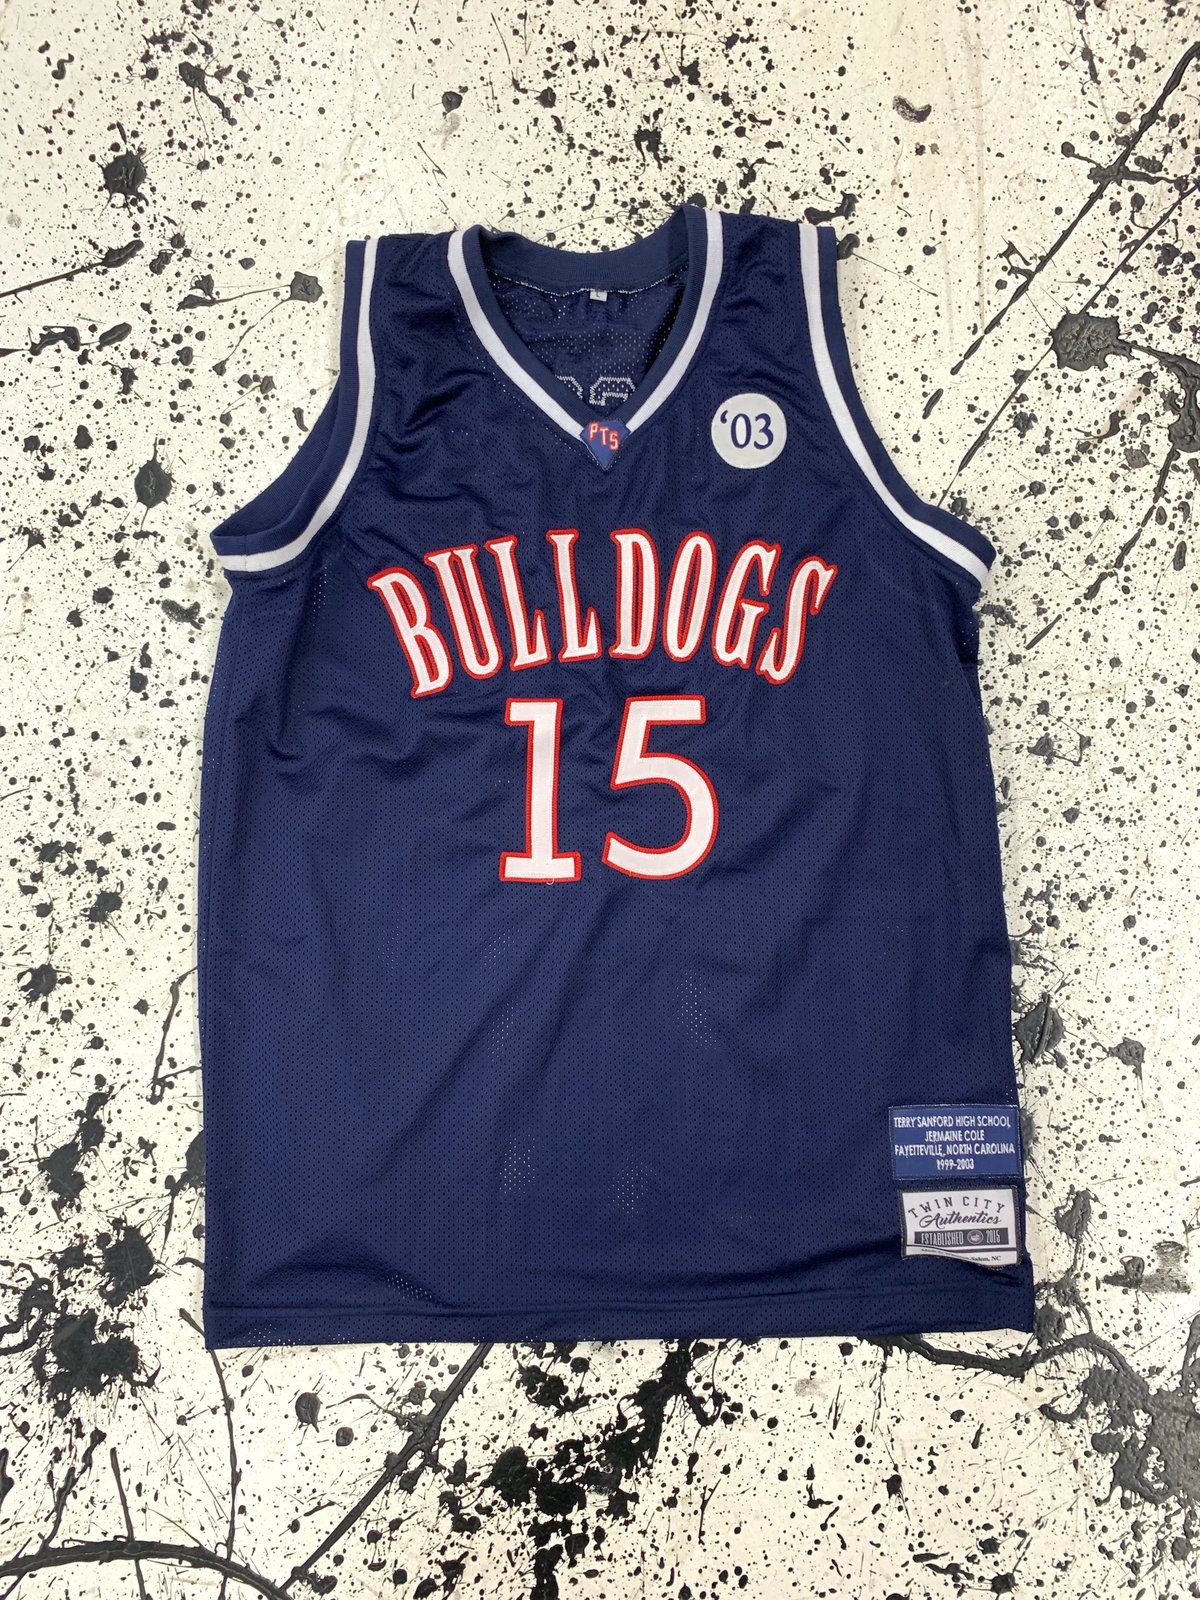 j cole high school basketball jersey for sale